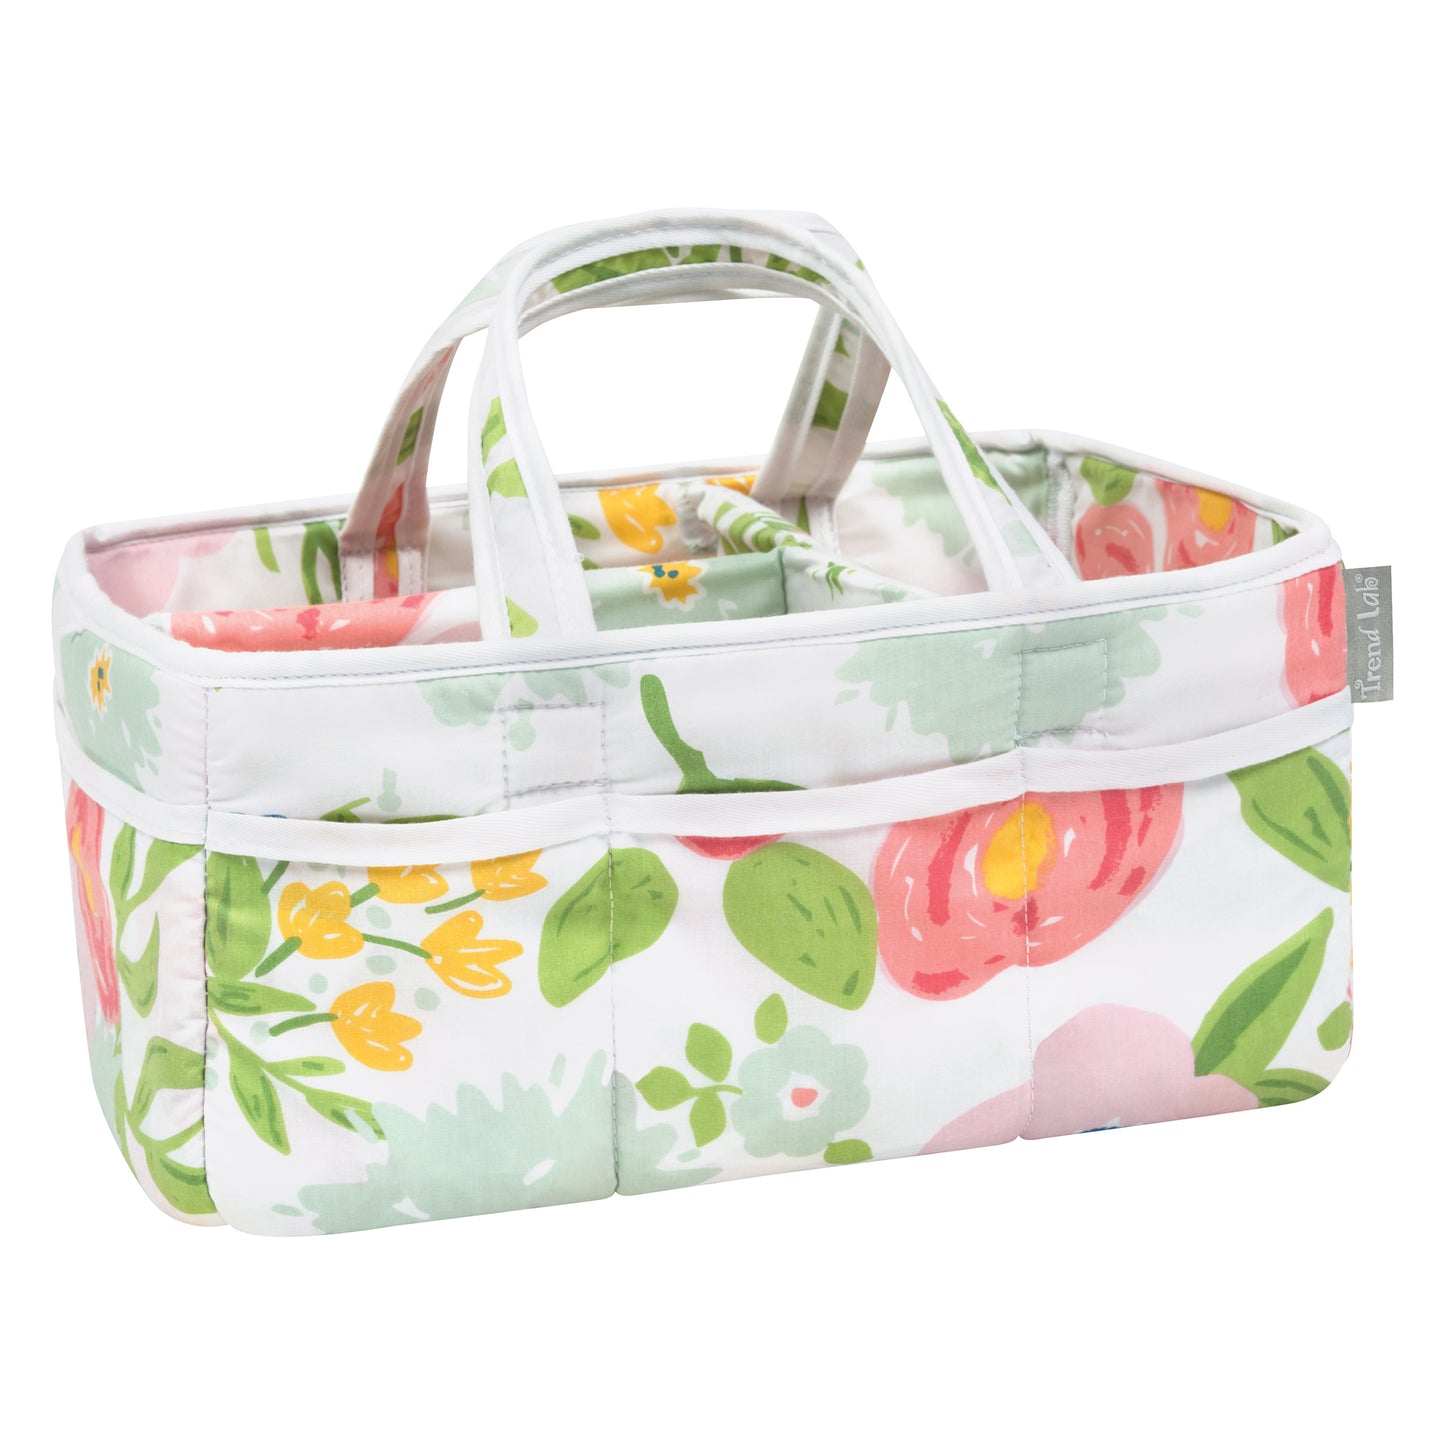  Floral Storage Caddy- angled view